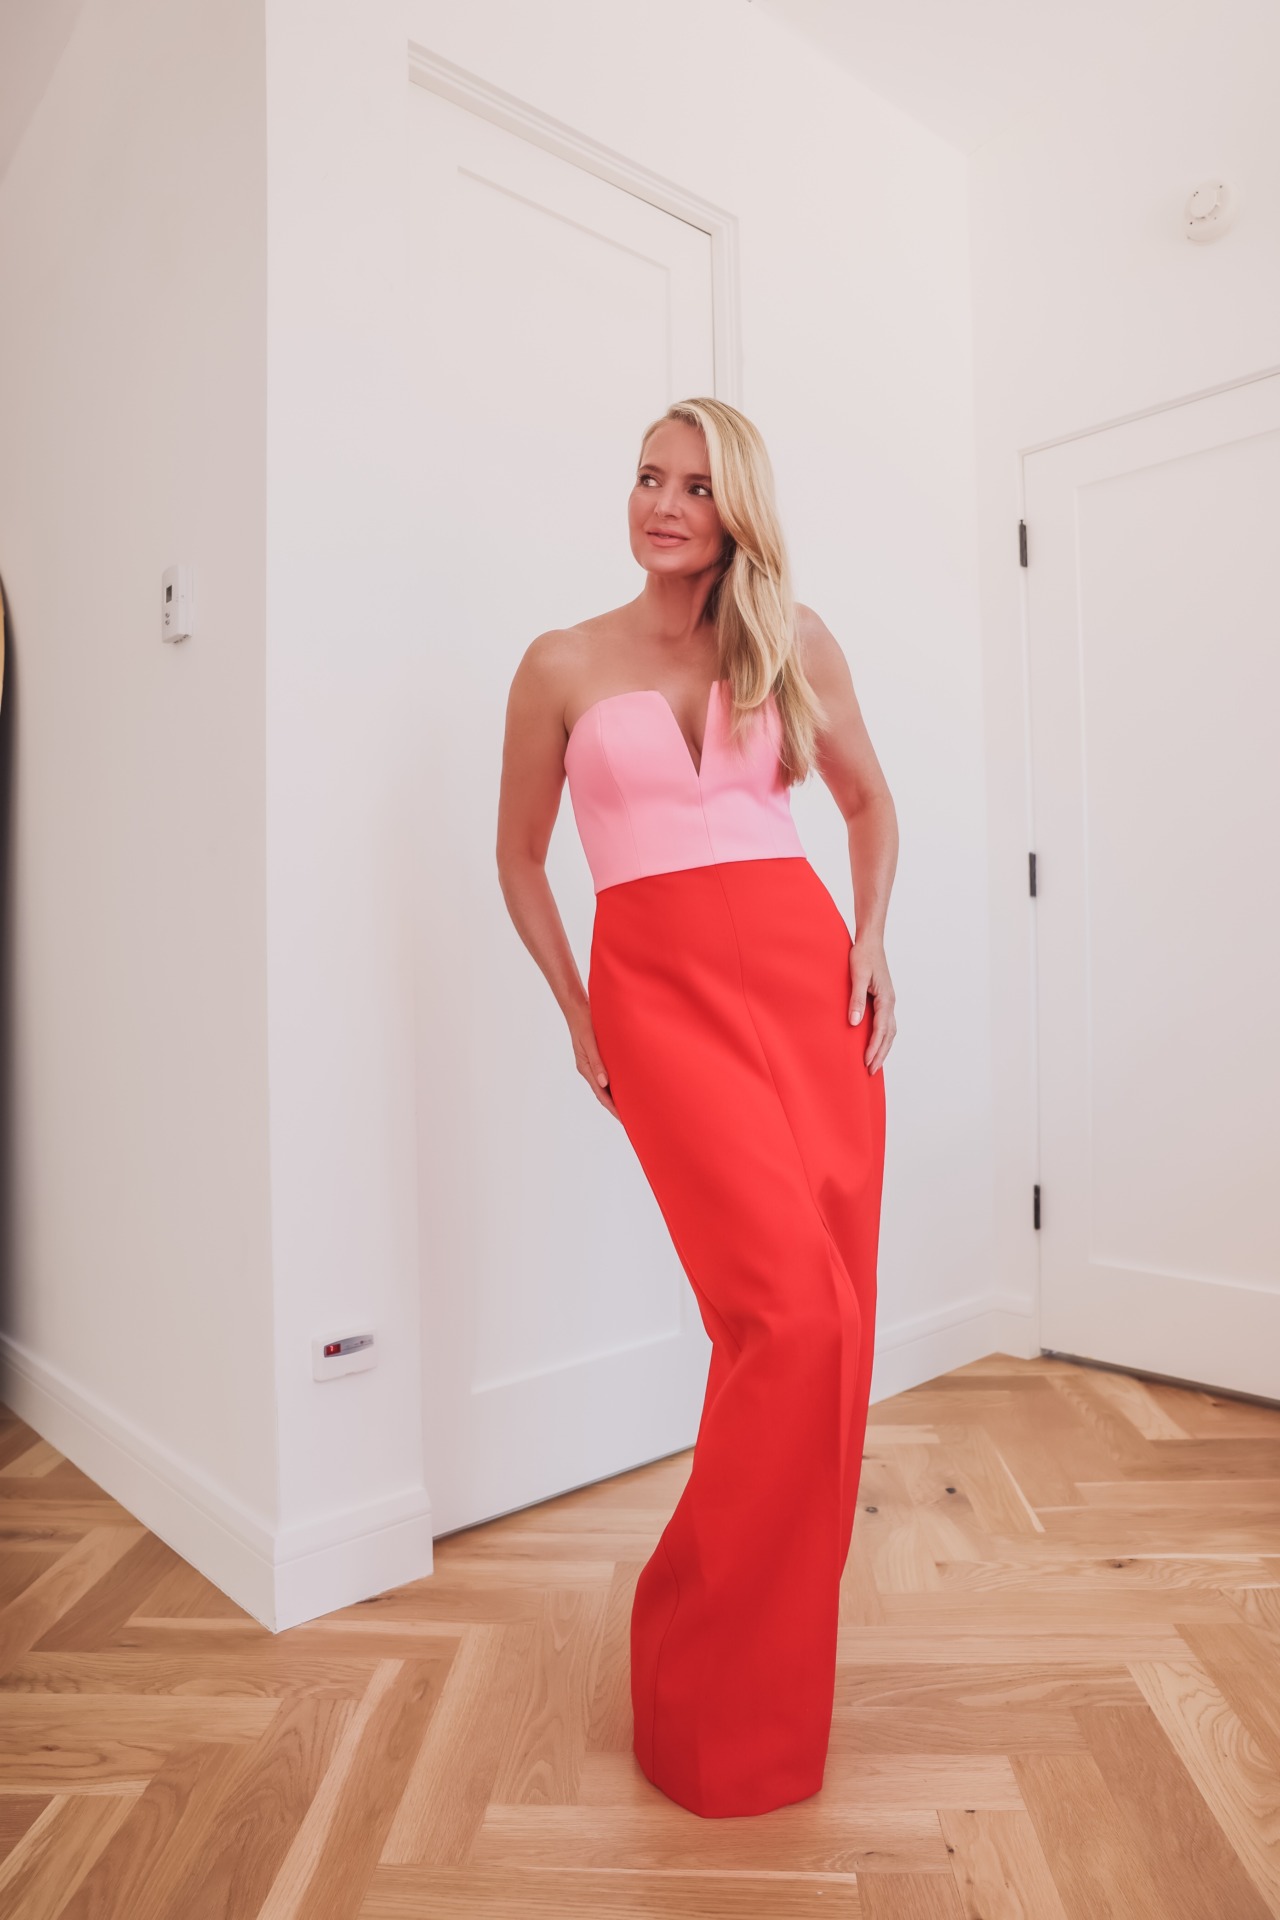 BCBG Colorblock Dress | How To Look Slimmer in a Dress